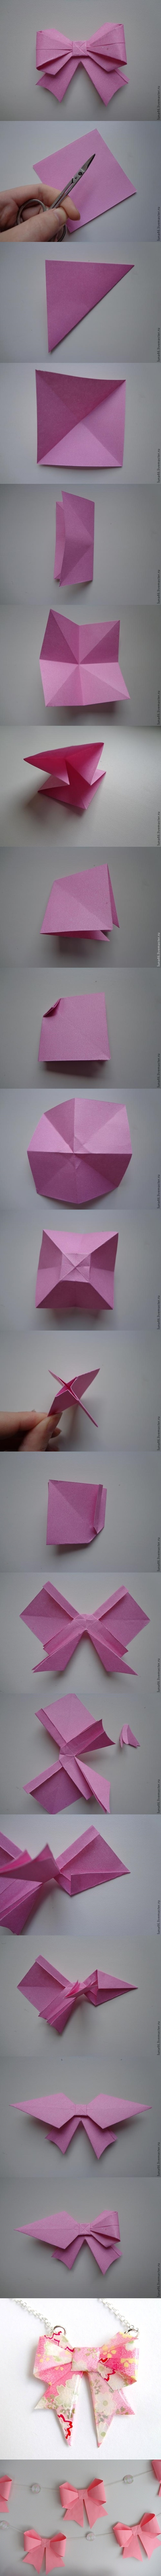 How To Make An Origami Bow Craftionary